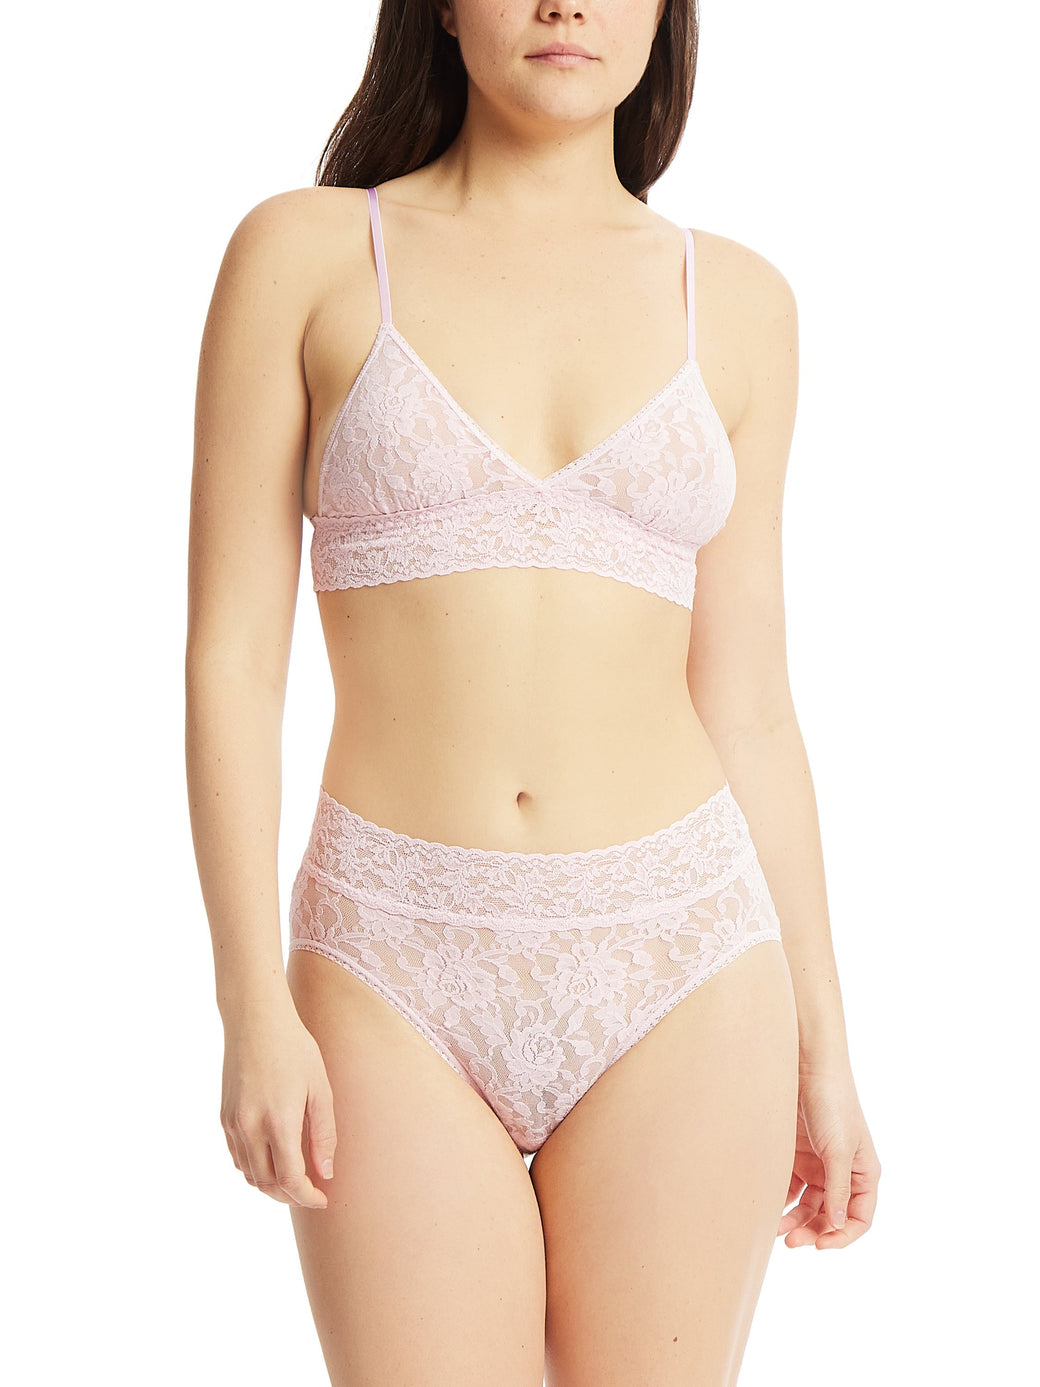 Hanky Panky Women's Signature Lace Crossover Bralette, Glo Pink